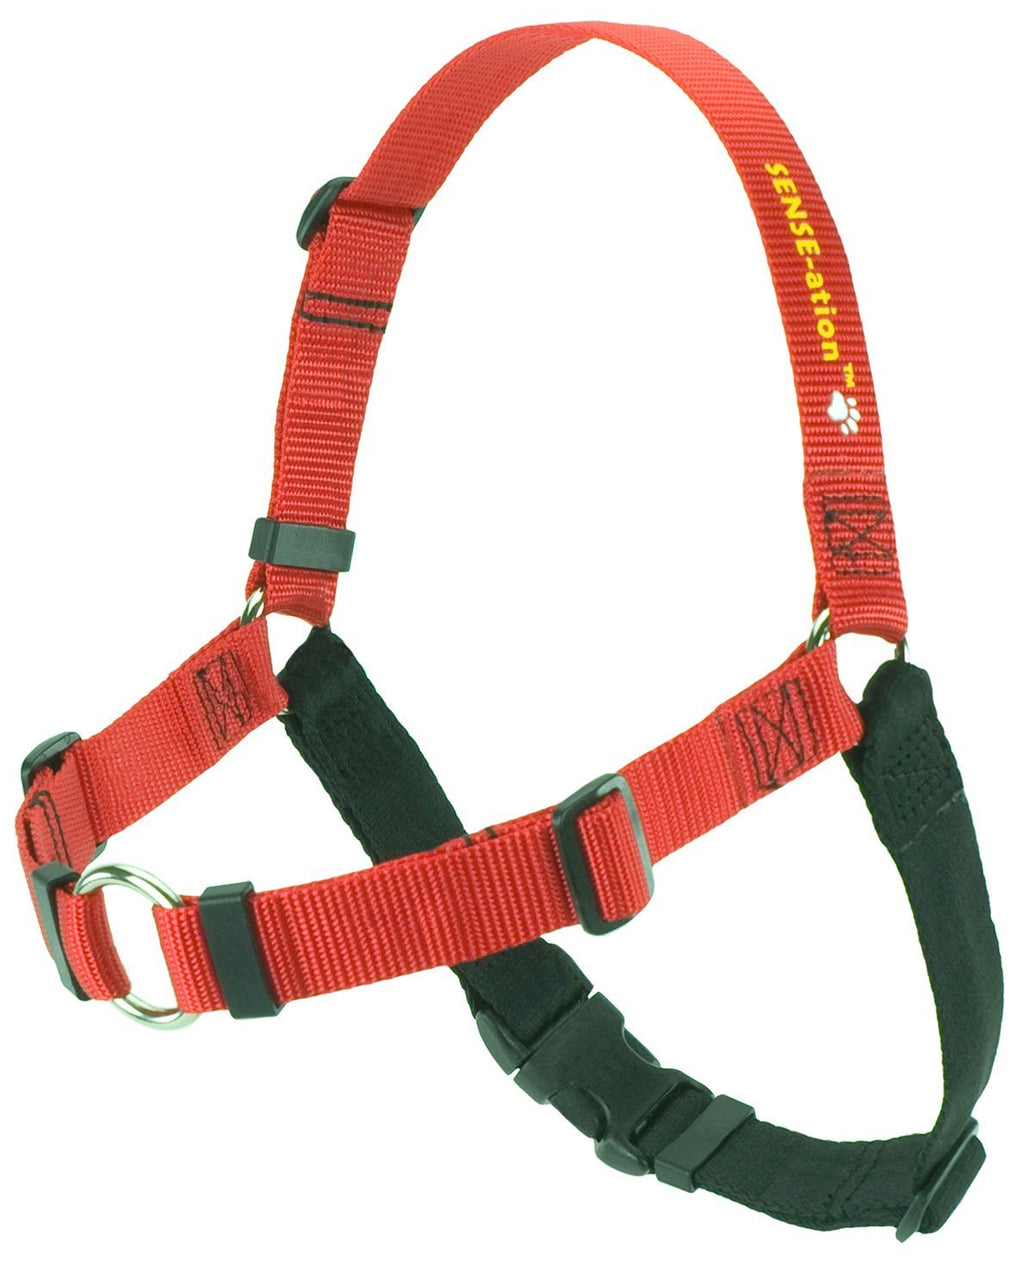 [Australia] - Softouch Concepts Sense-ation No-Pull Dog Harness - Red, Large (Wide) 